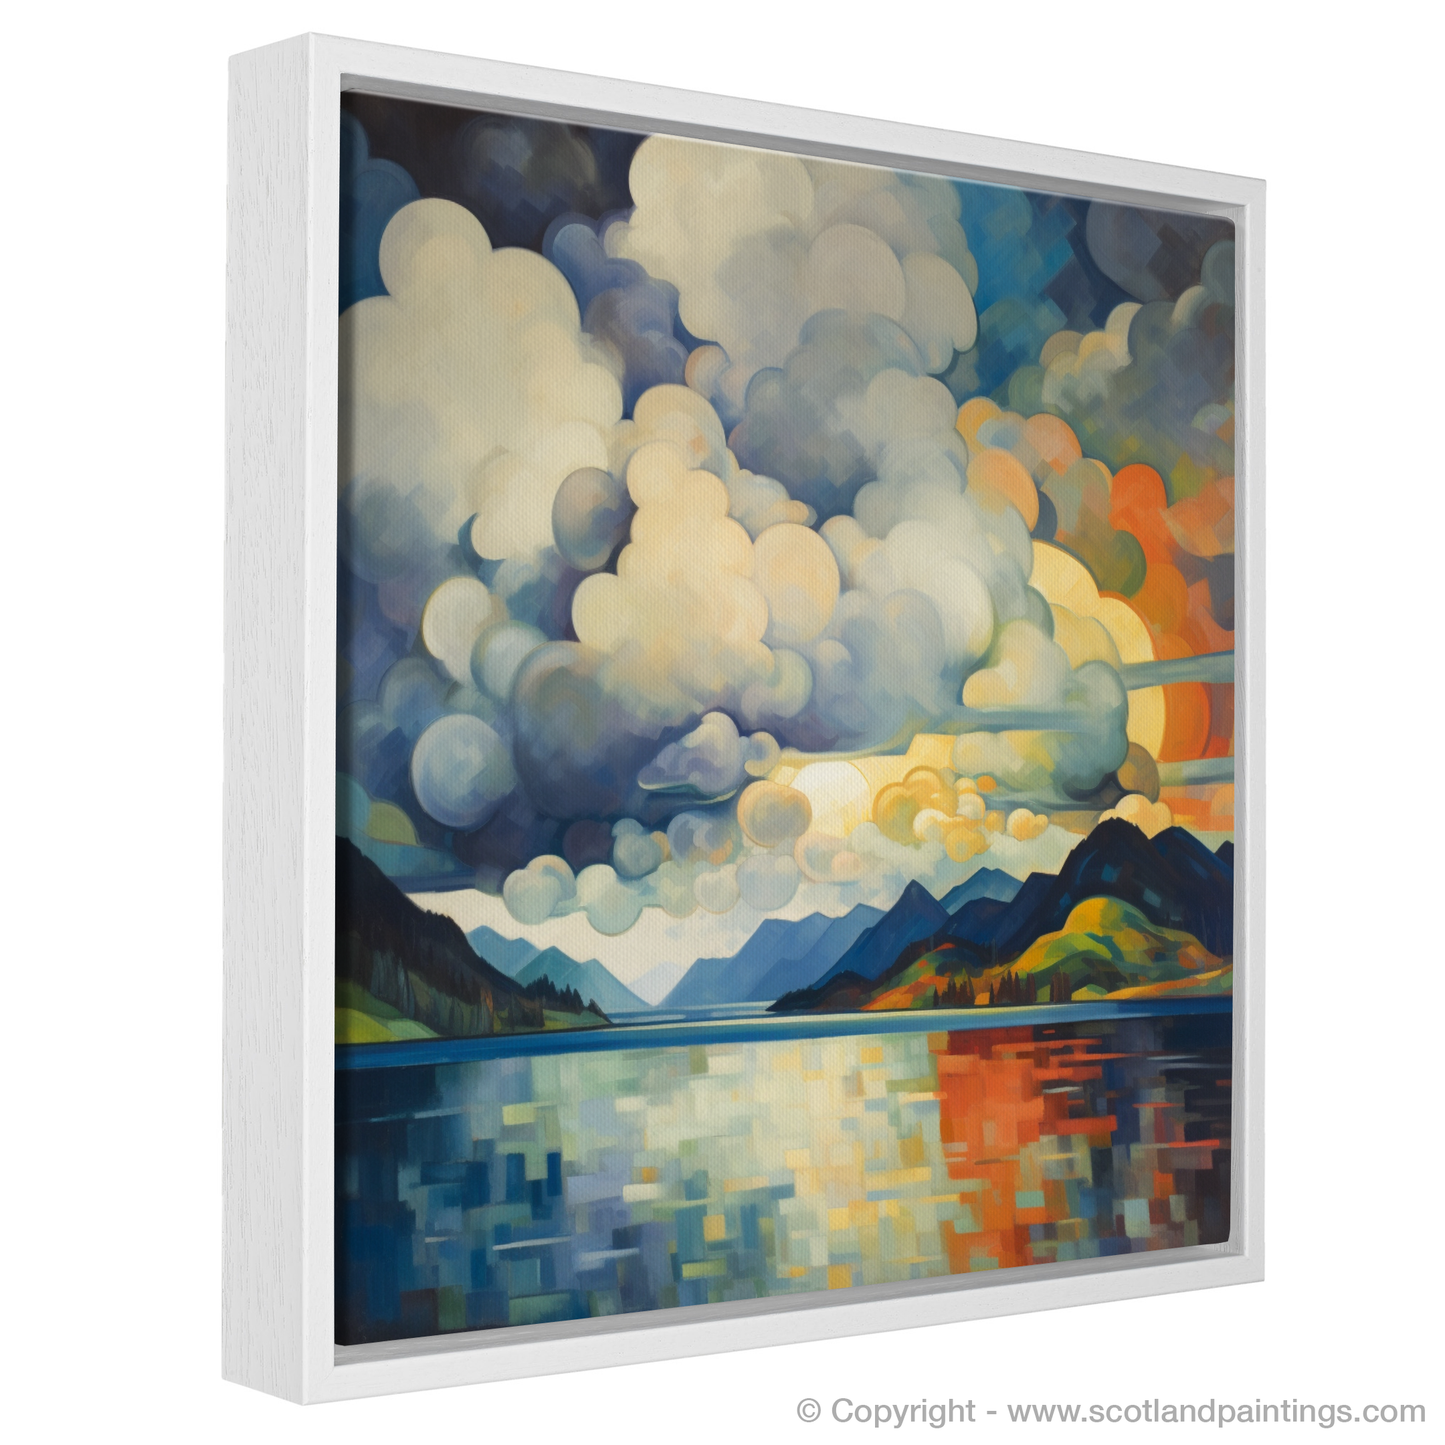 Painting and Art Print of Storm clouds above Loch Lomond entitled "Storm's Embrace: Abstract Visions of Loch Lomond".